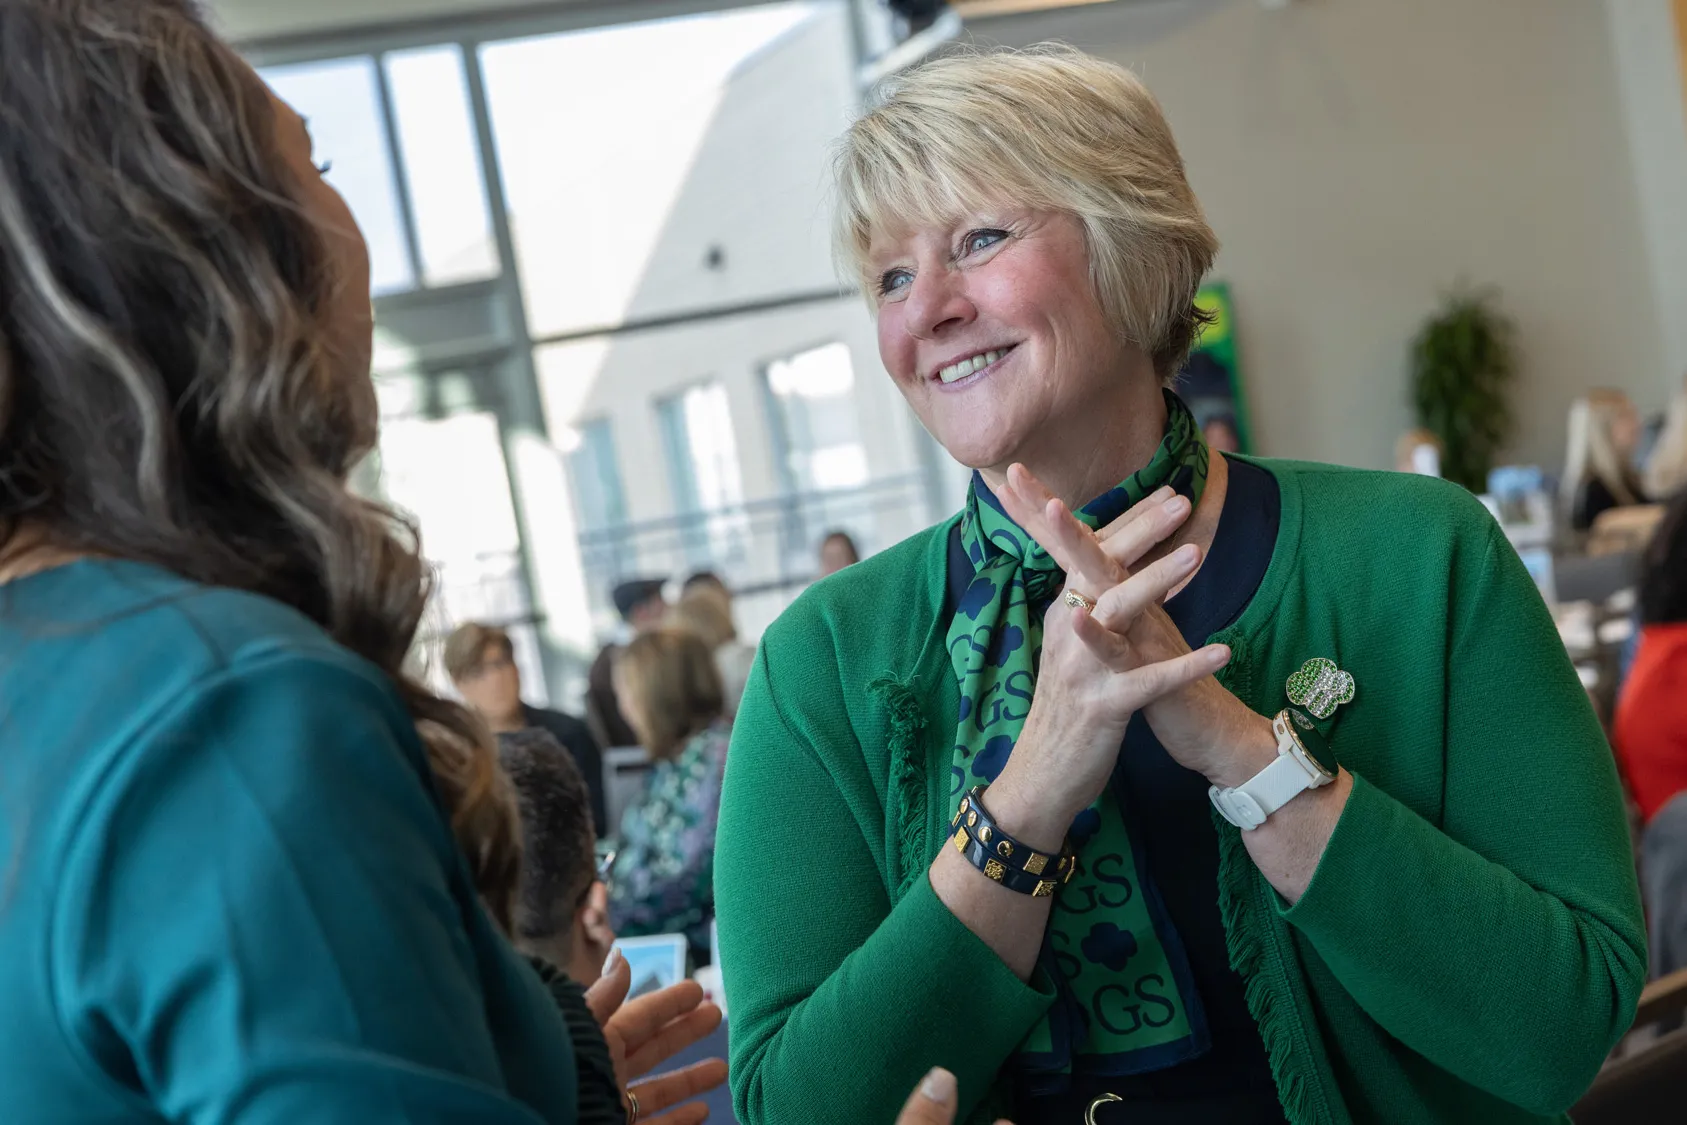 From this photo, you can tell that Tammy Wharton, a white woman with short blond hair and a pretty smile, has excellent listening habits. She seems super-engaged and even encouraging as she looks directly at the woman who’s speaking with her, who is pictured from behind. Other people are in the background of the photo, so you can see it’s a meeting or convention at a place where huge windows let in lots of natural light. 